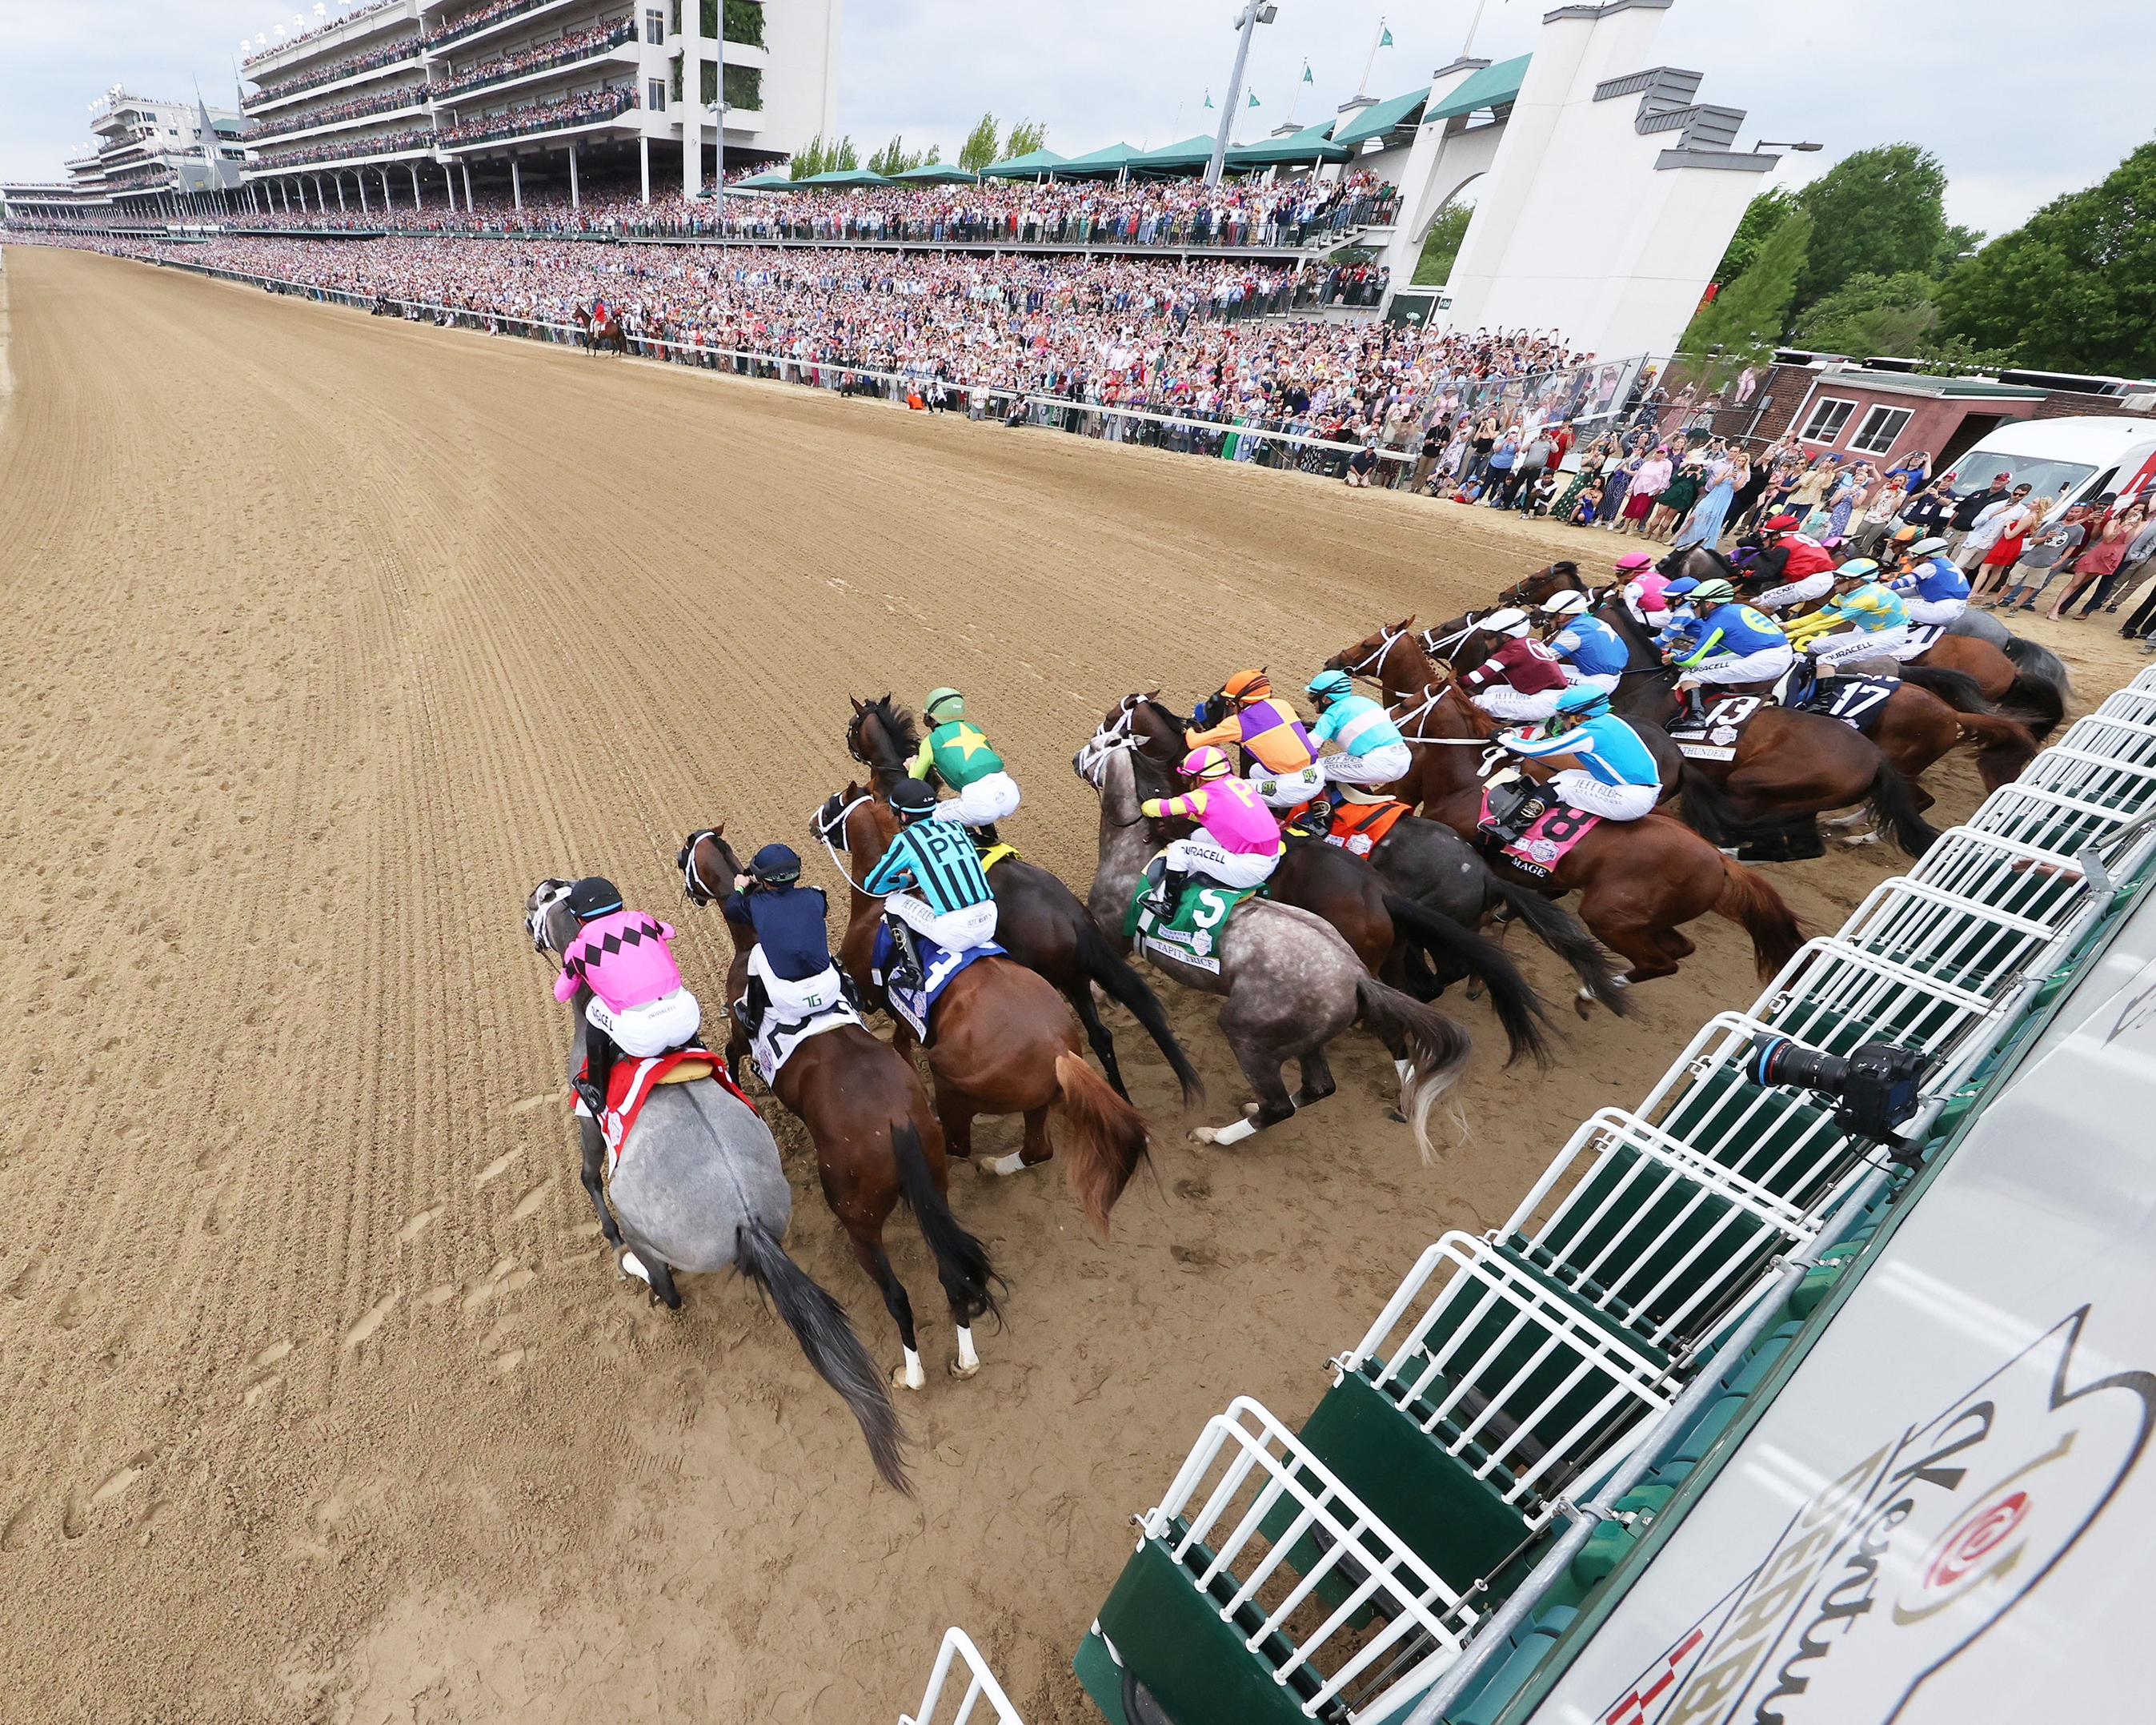 Kentucky Derby purse raised to $5 million for 150th race in May